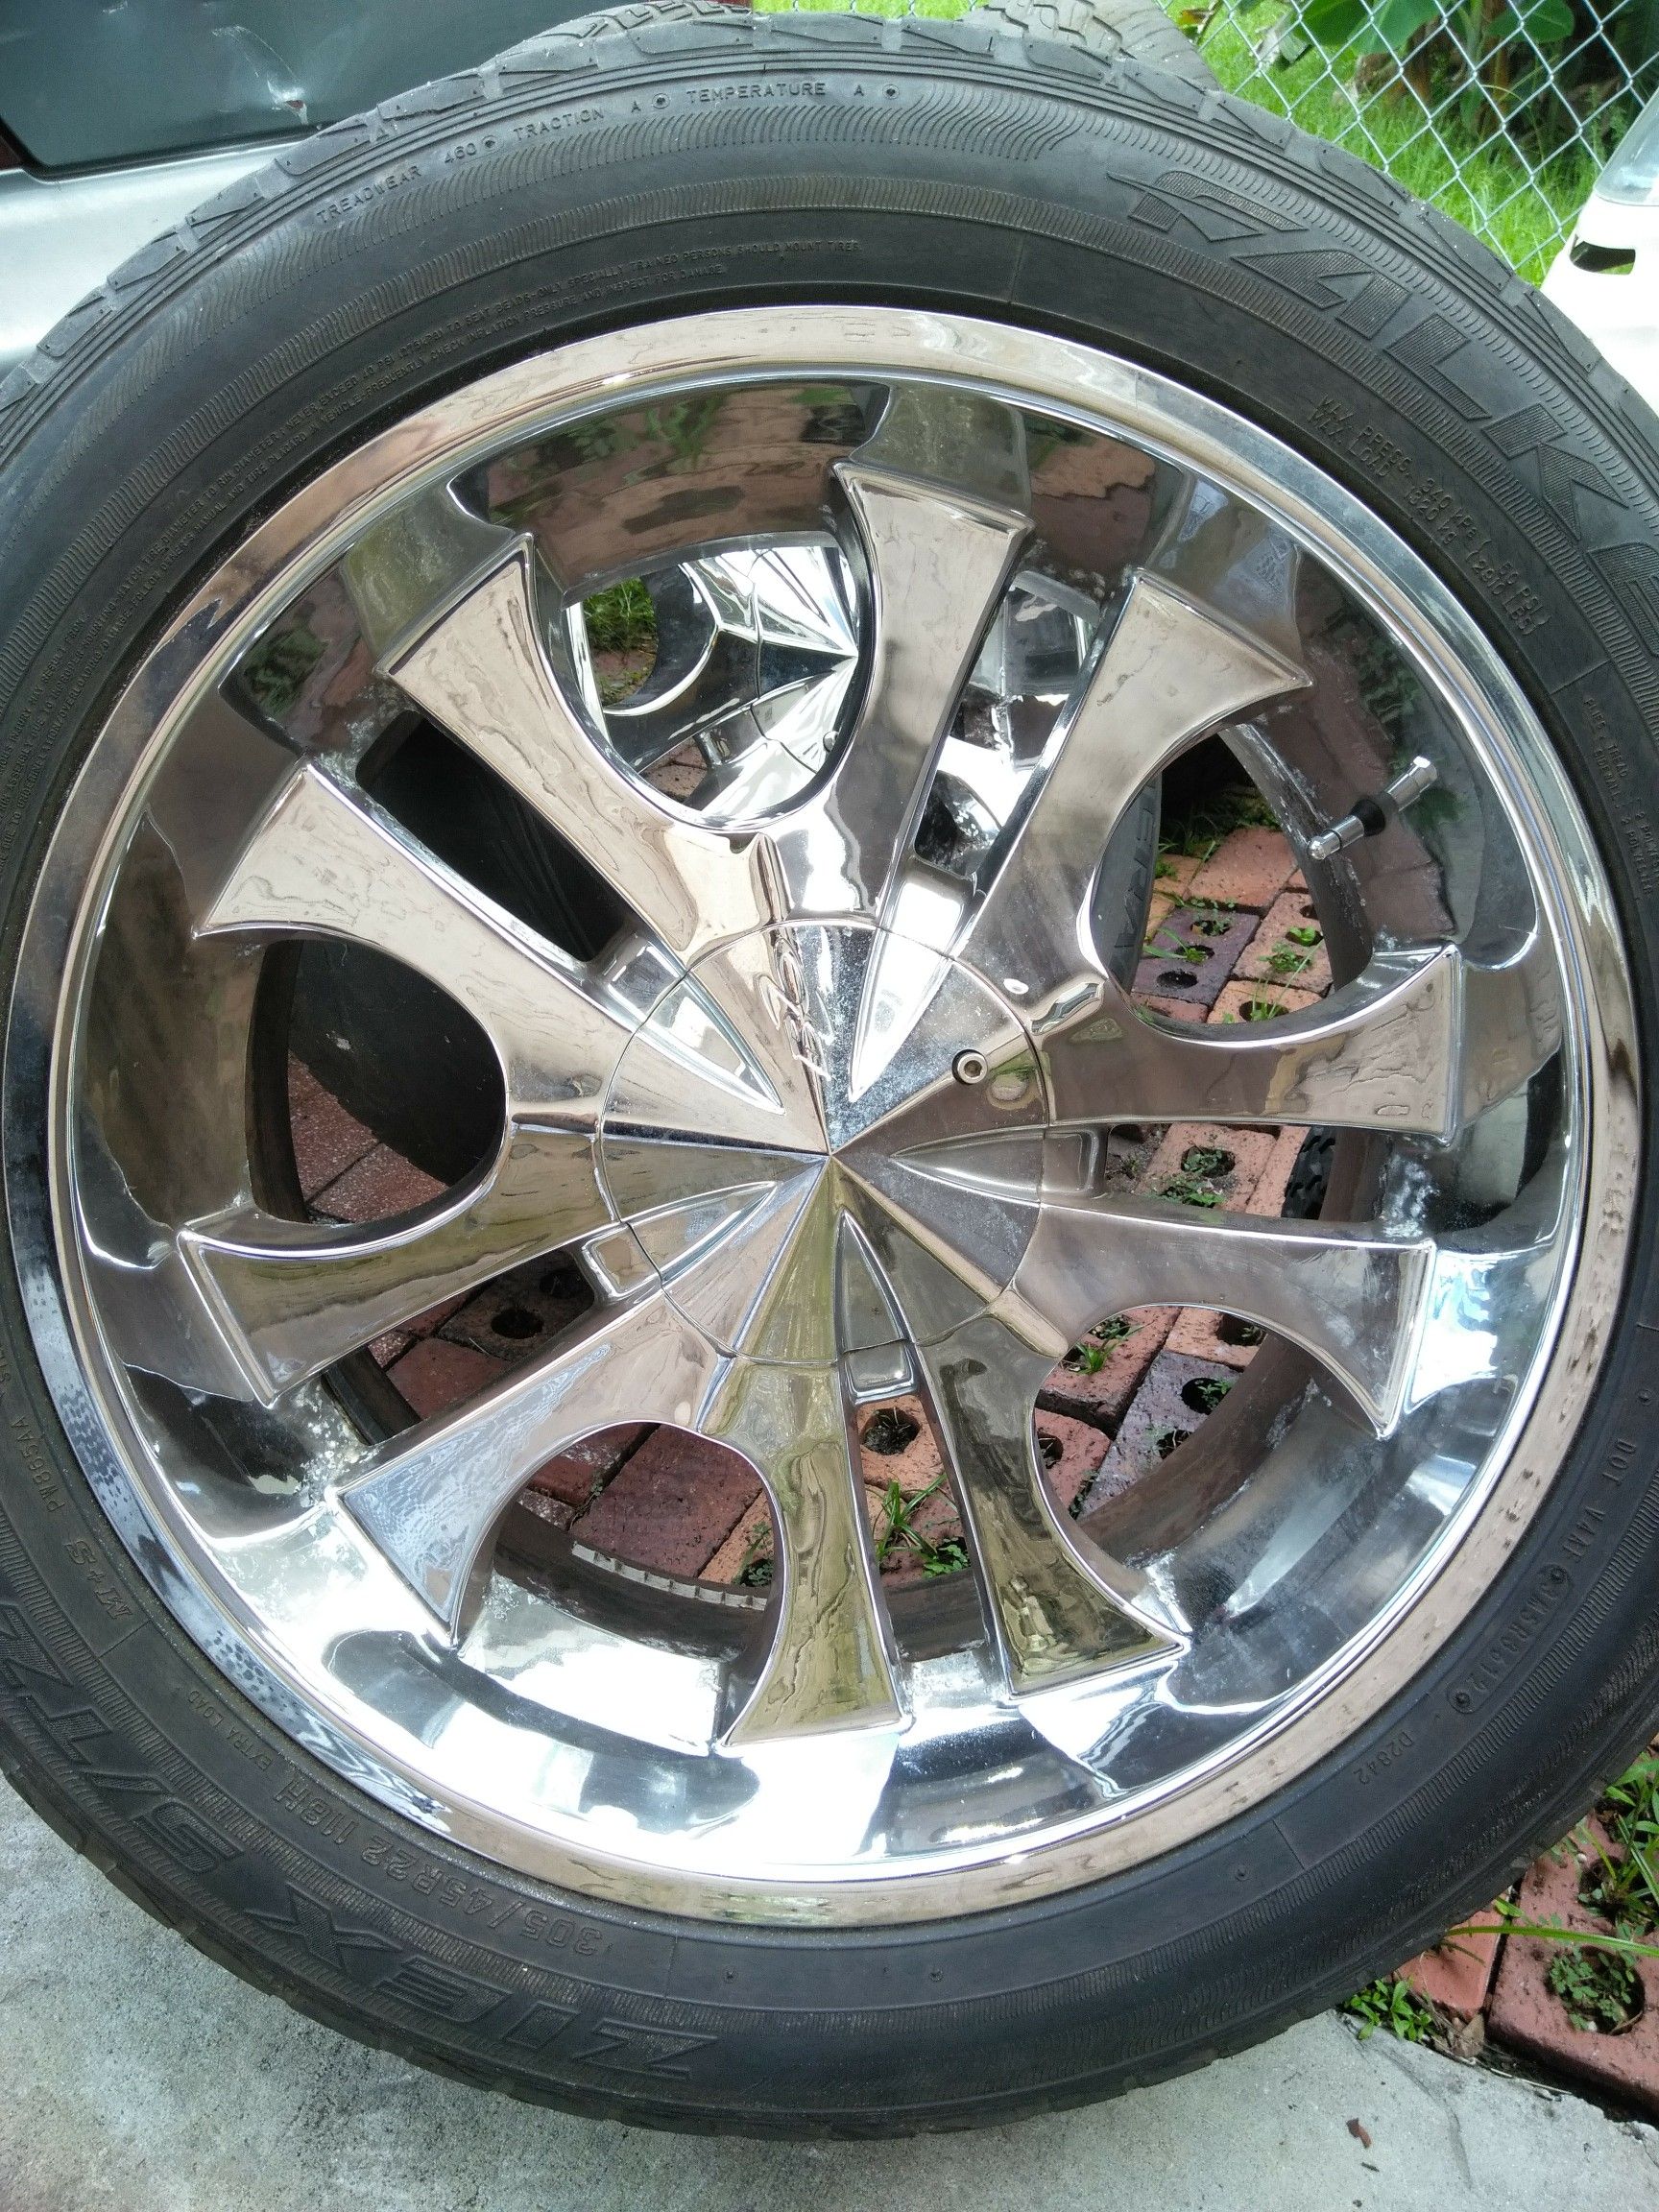 Tires off an F150 Truck Wheels and Rims if interested contact Sam @ {contact info removed}